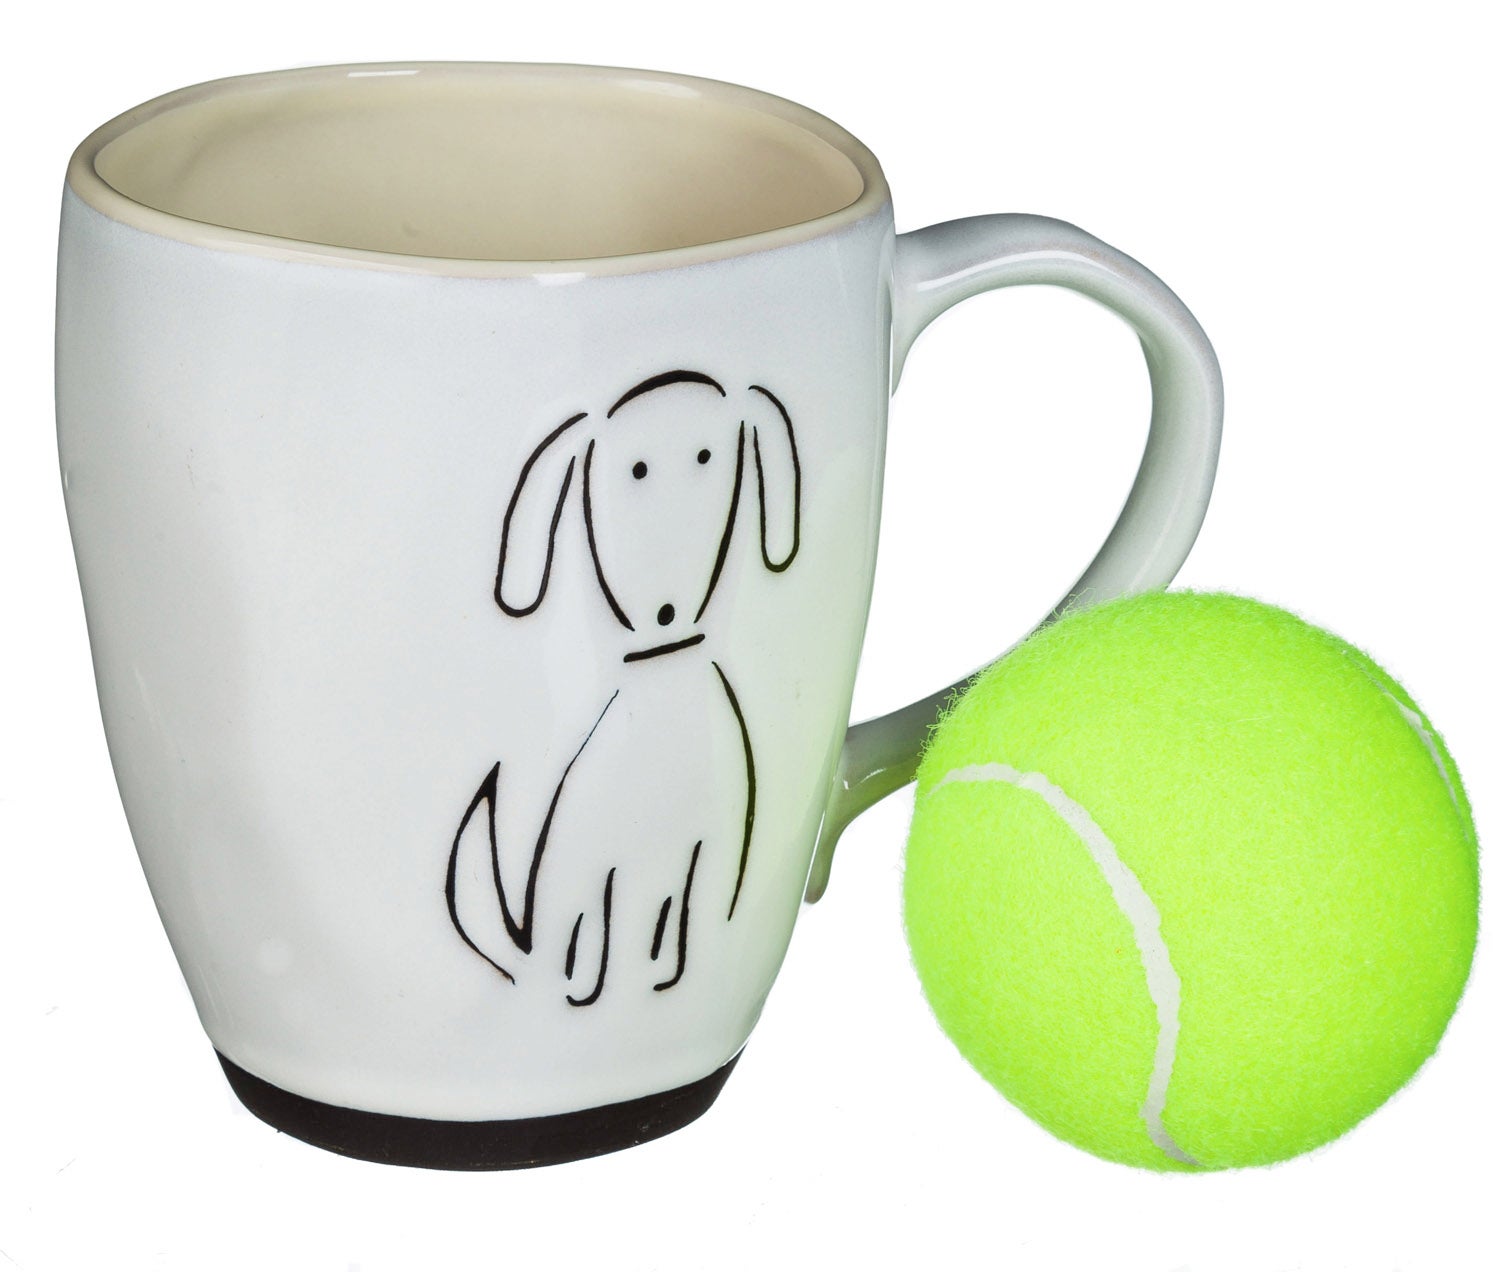 Pet Dog Ceramic Cup and Toy Gift Set